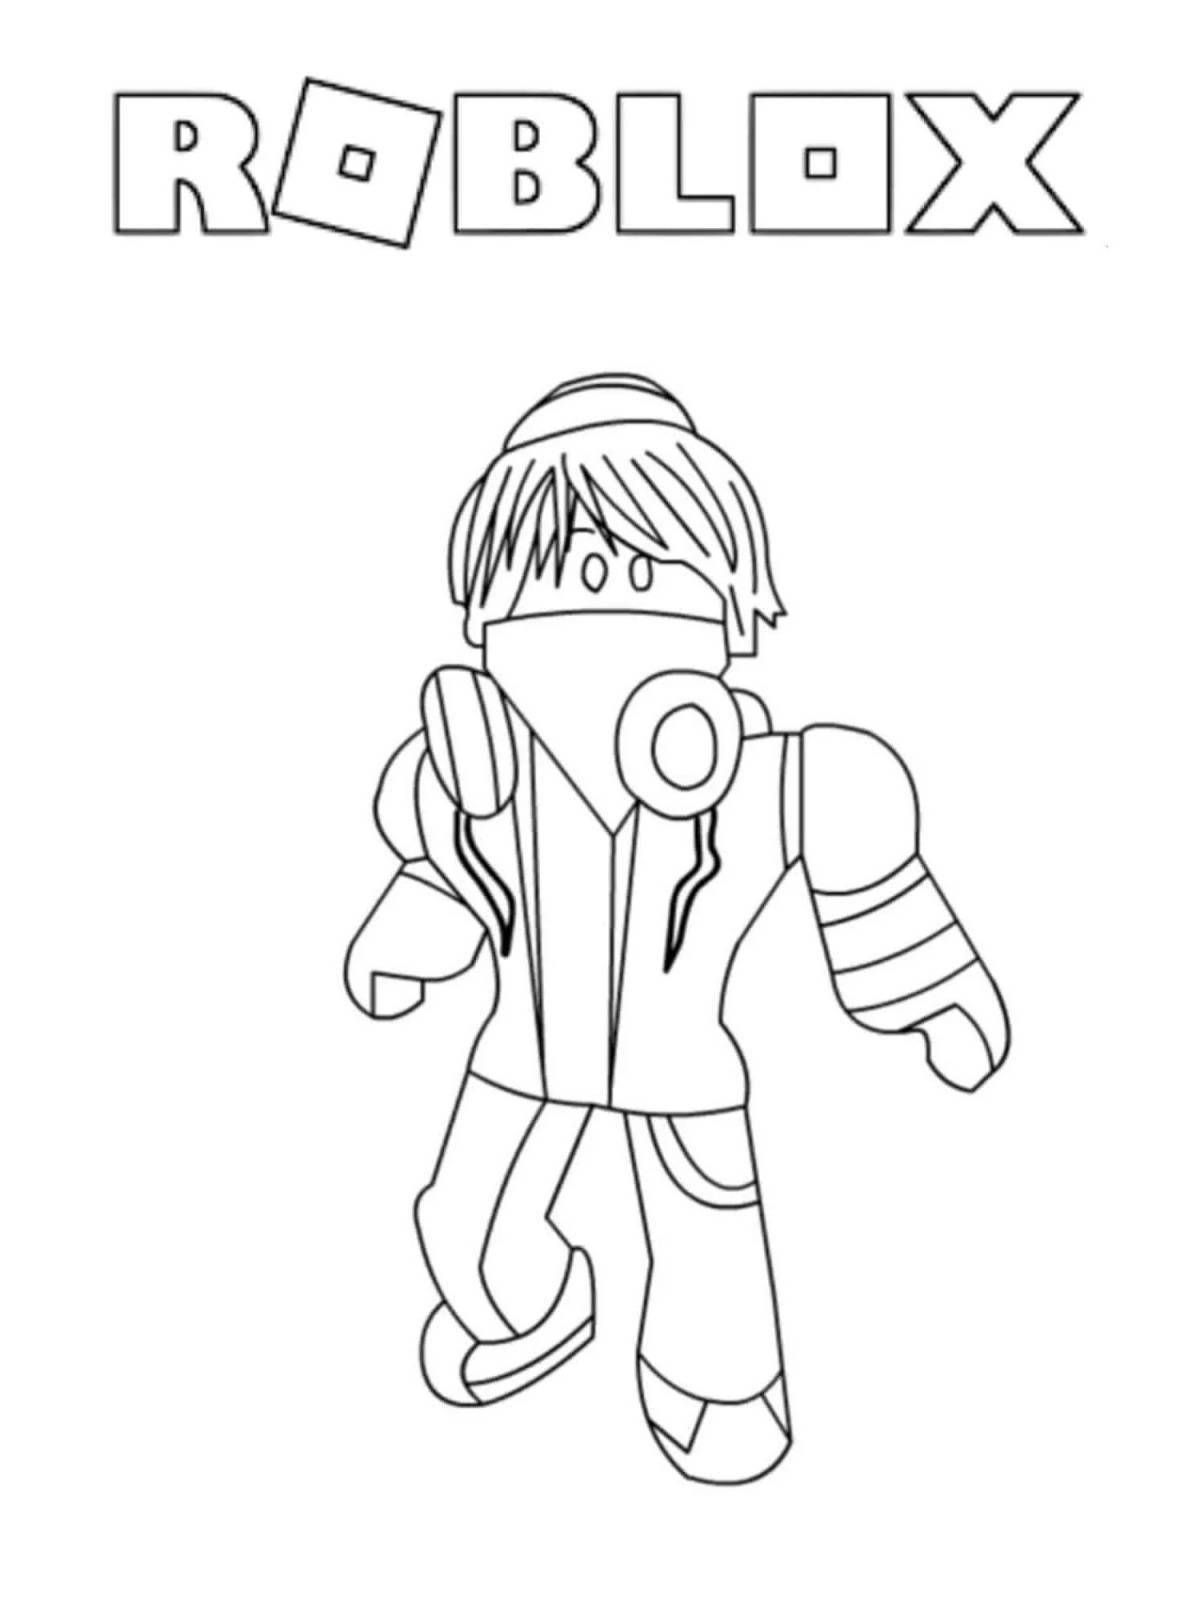 Colorful 100 doors roblox coloring page